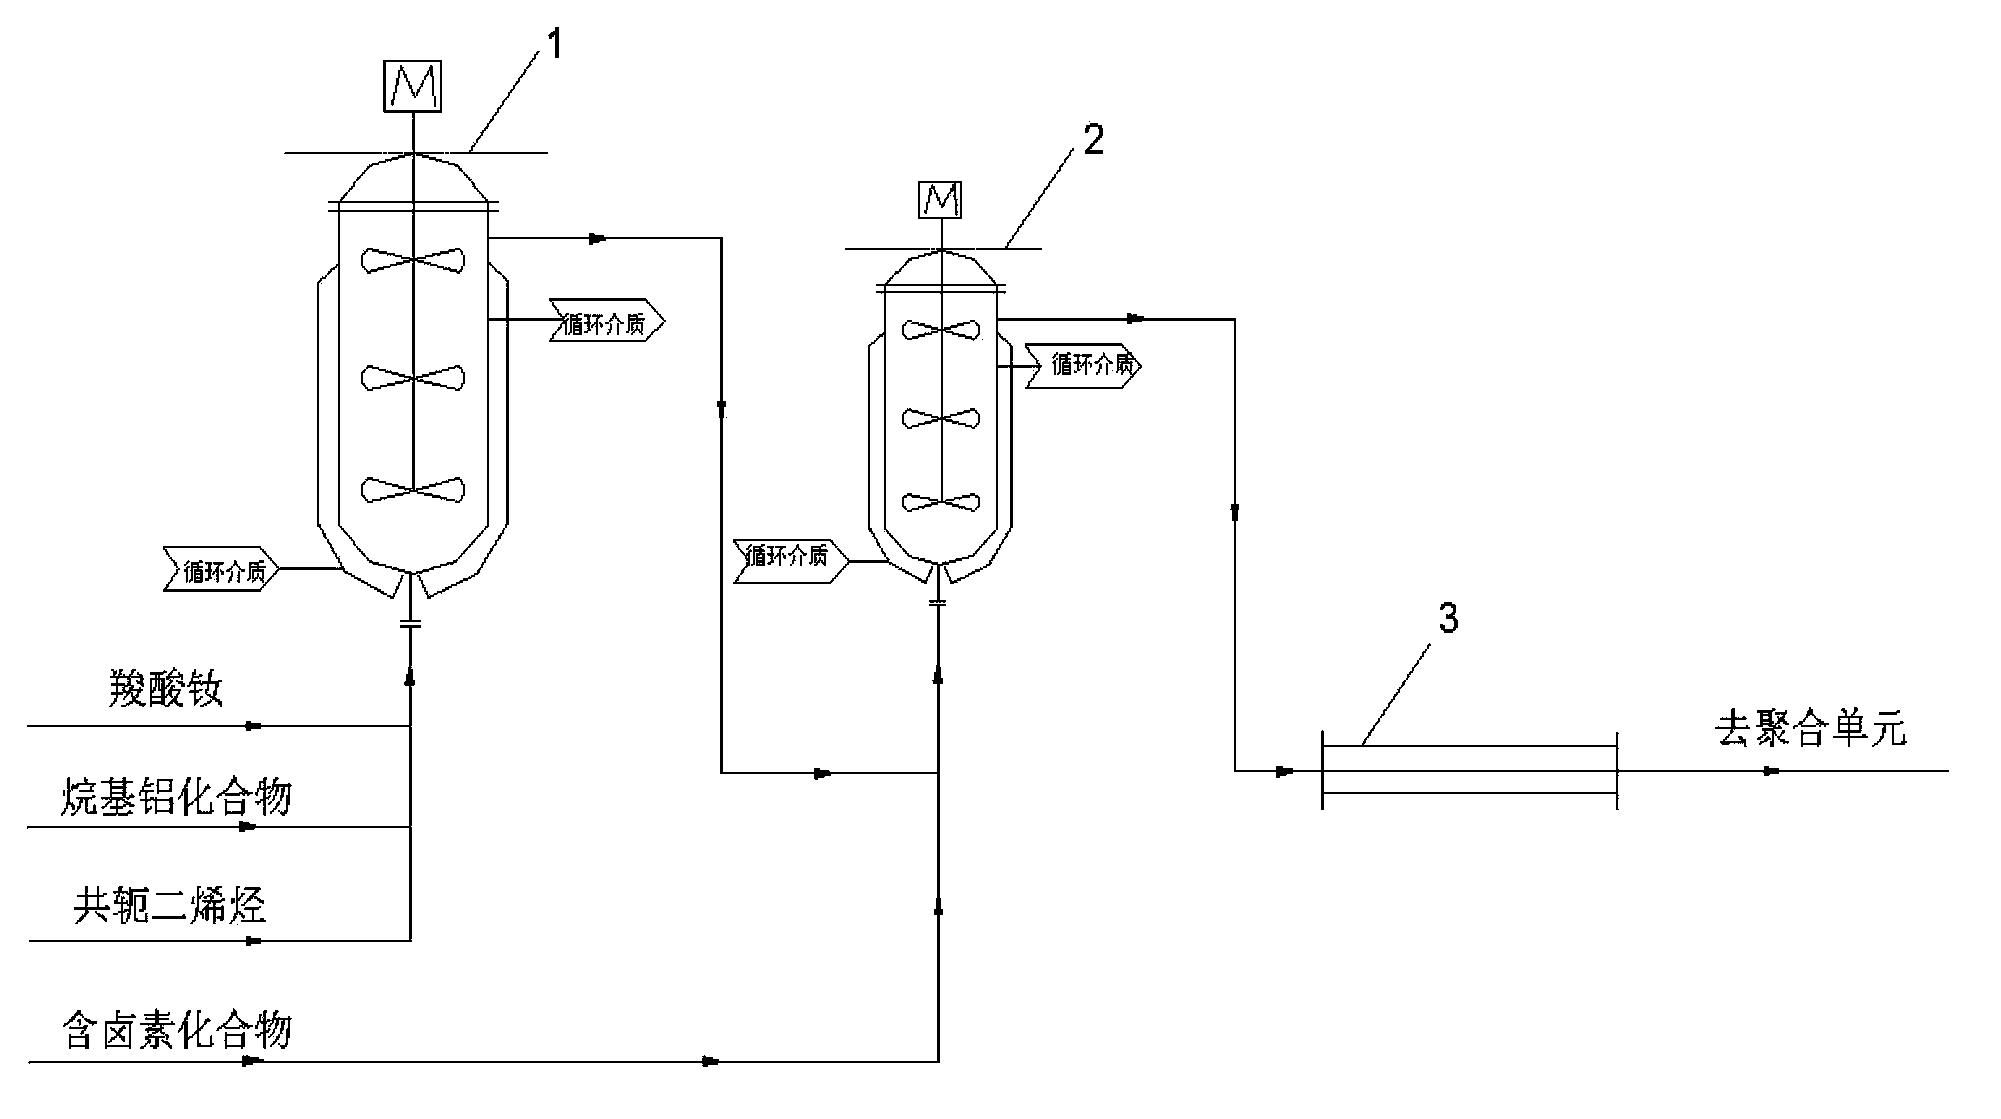 Continuous polymerization method